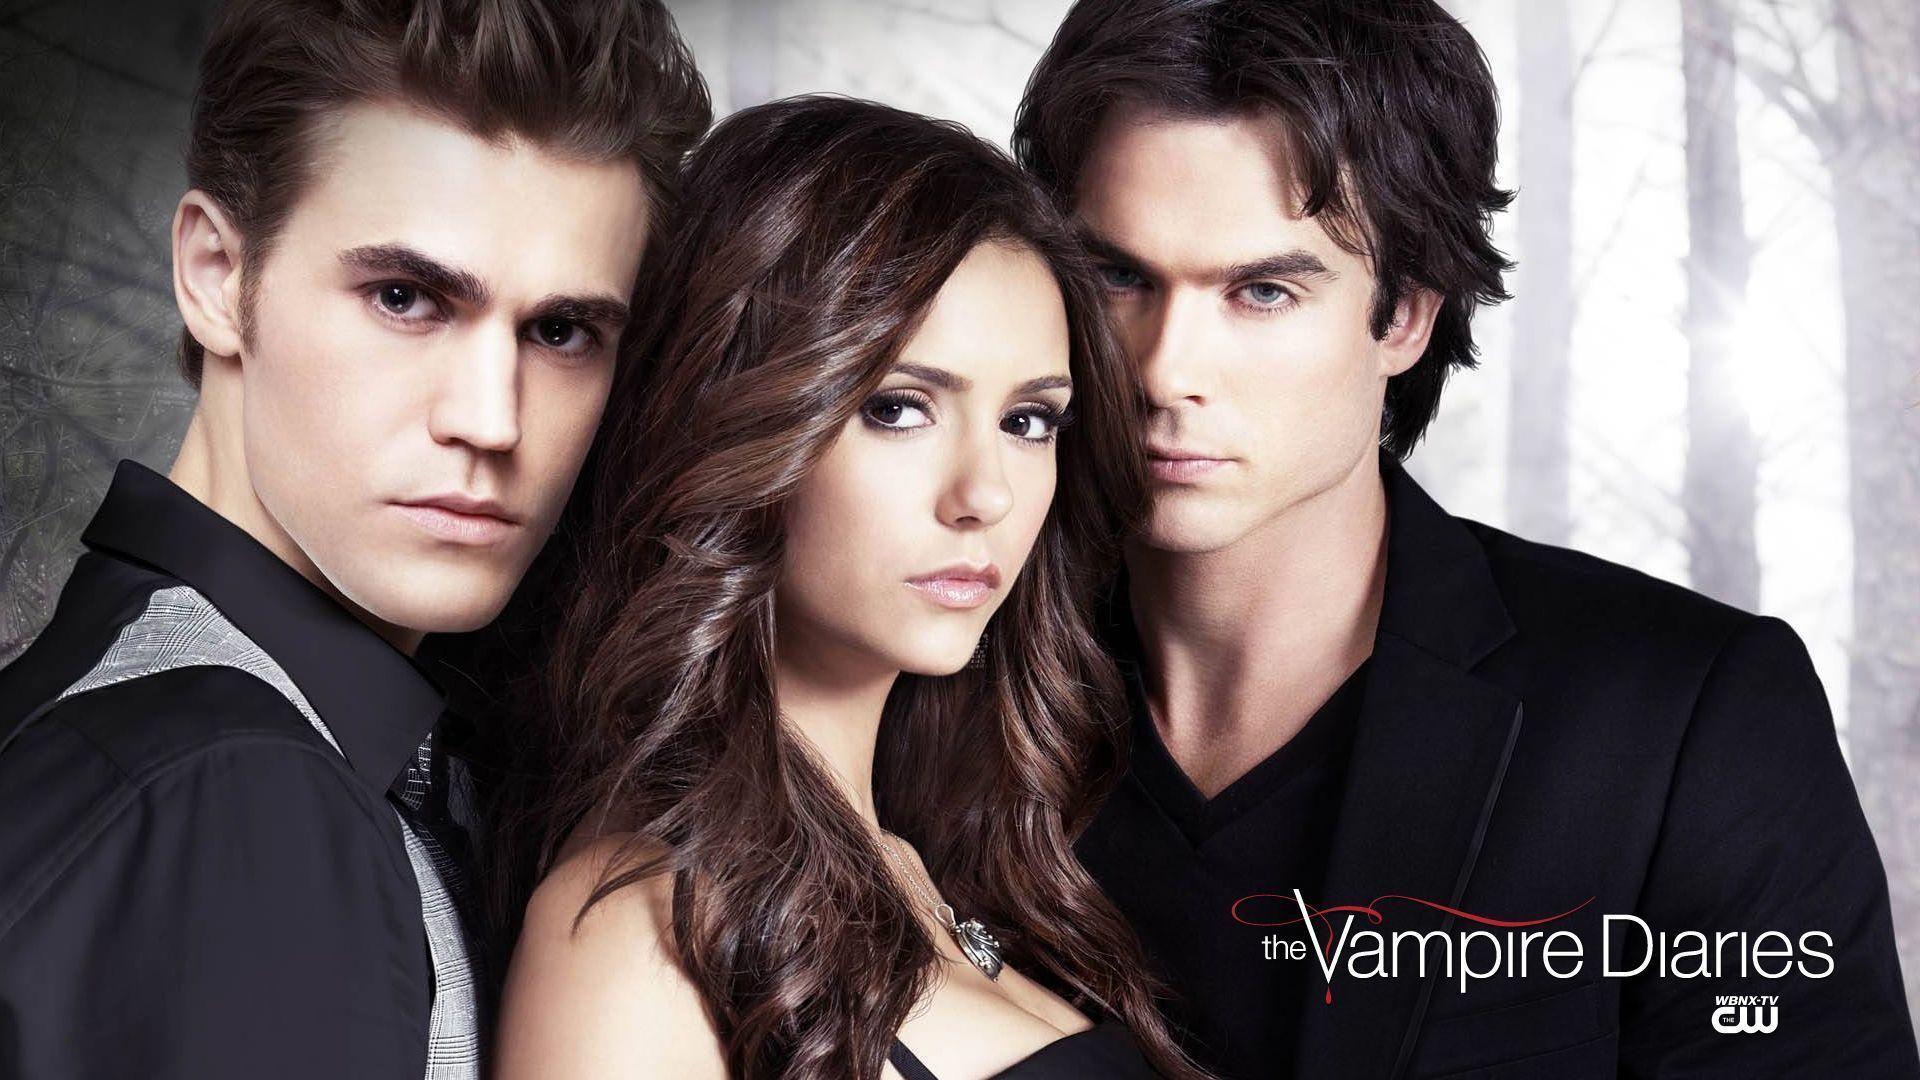 Elena And Damon From Vampire Diaries Image & Picture